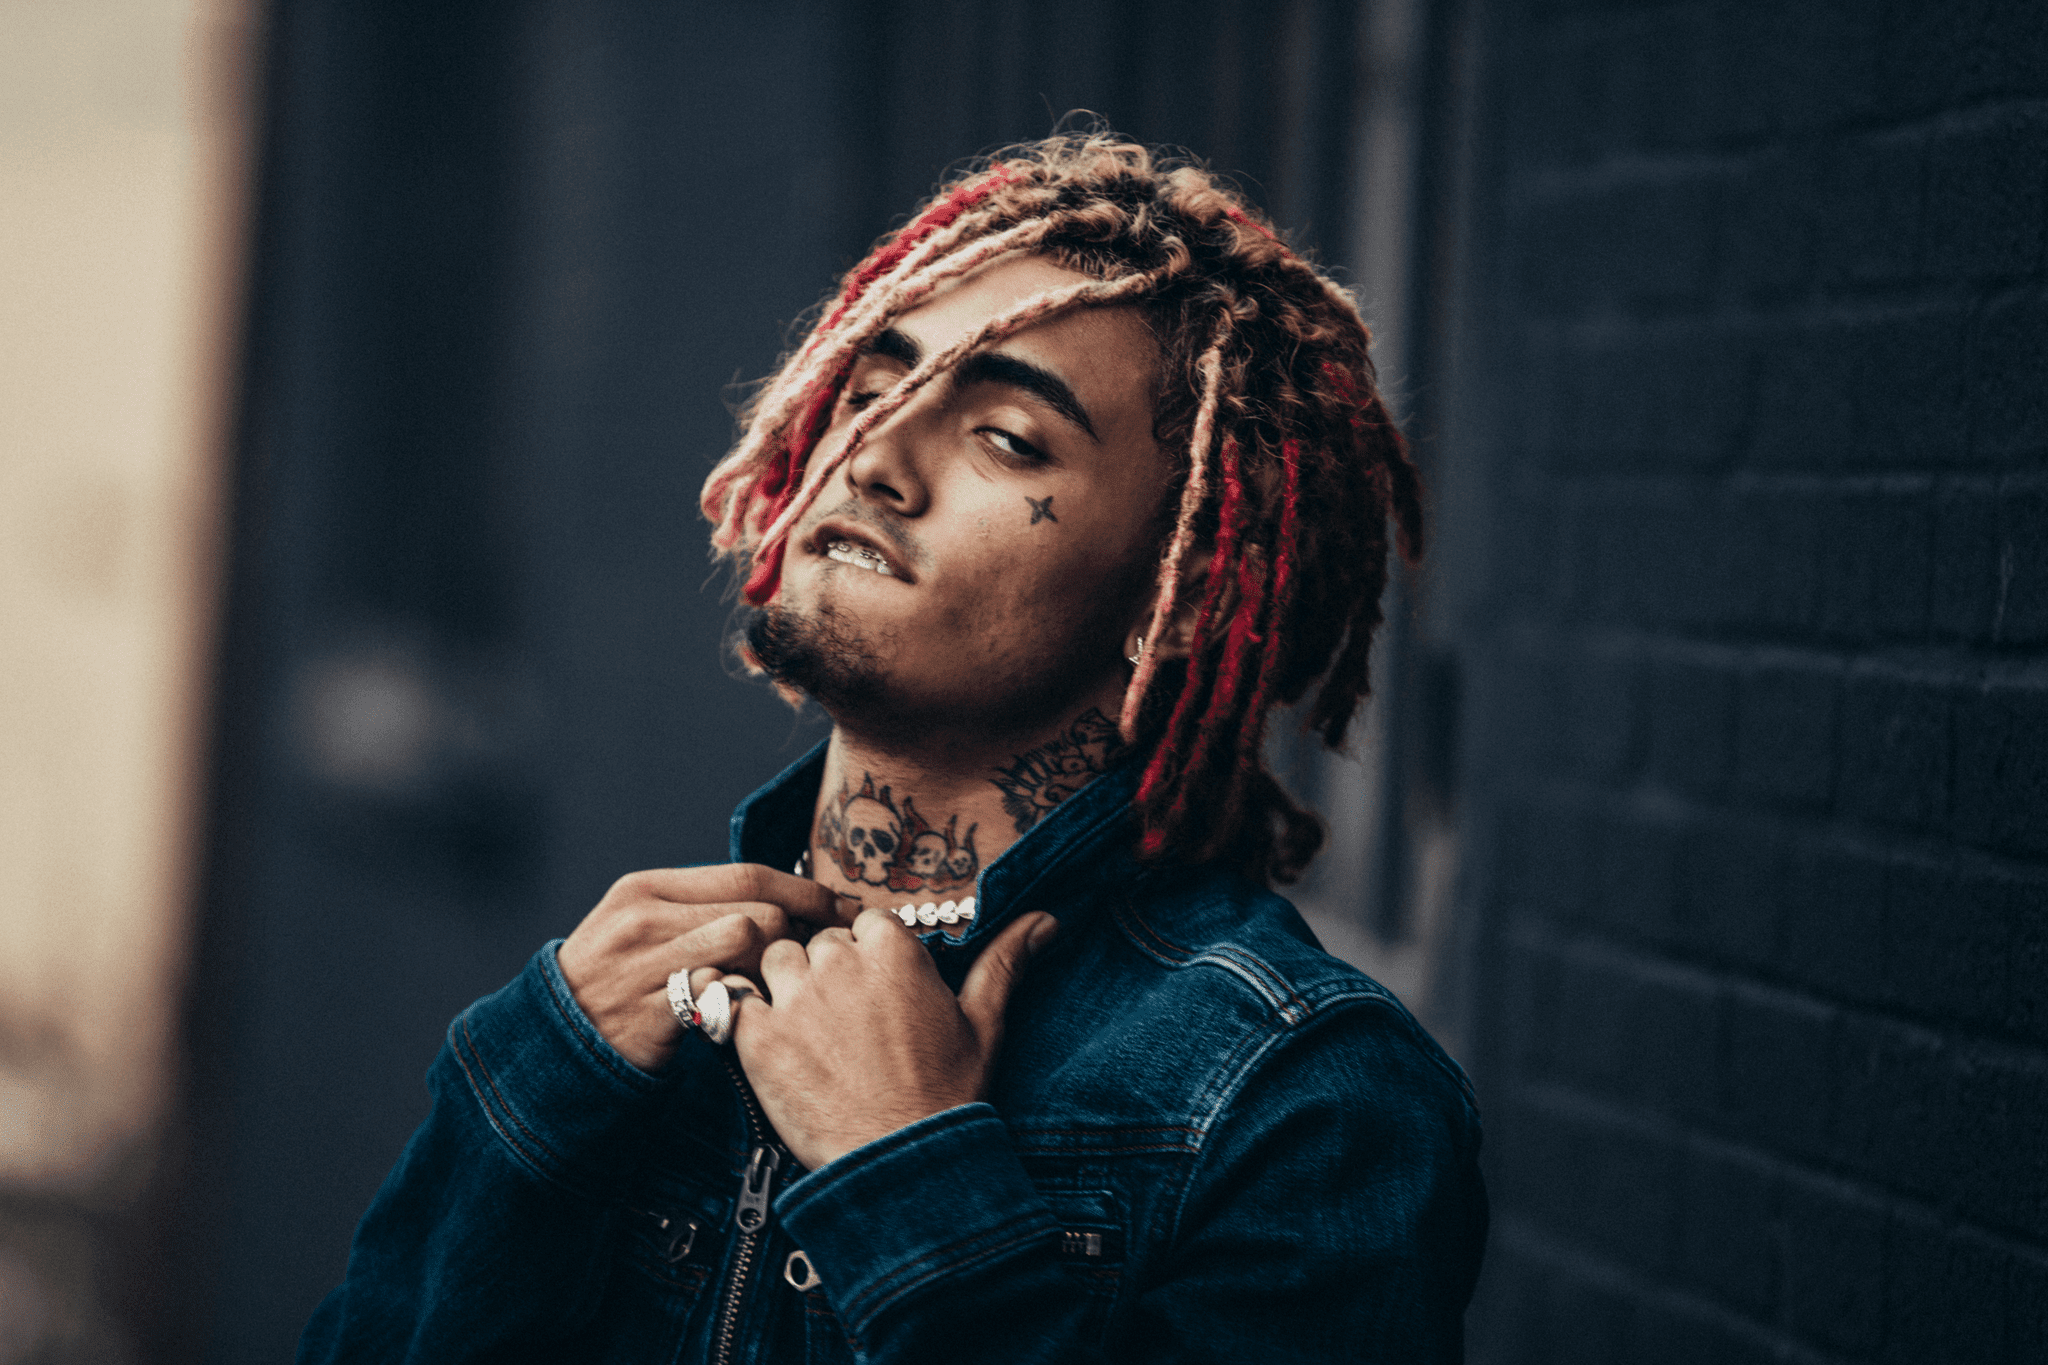 Lil Pump's Fans Freak Out After The Rapper Posts A Seemingly Suicidal Message On Social Media